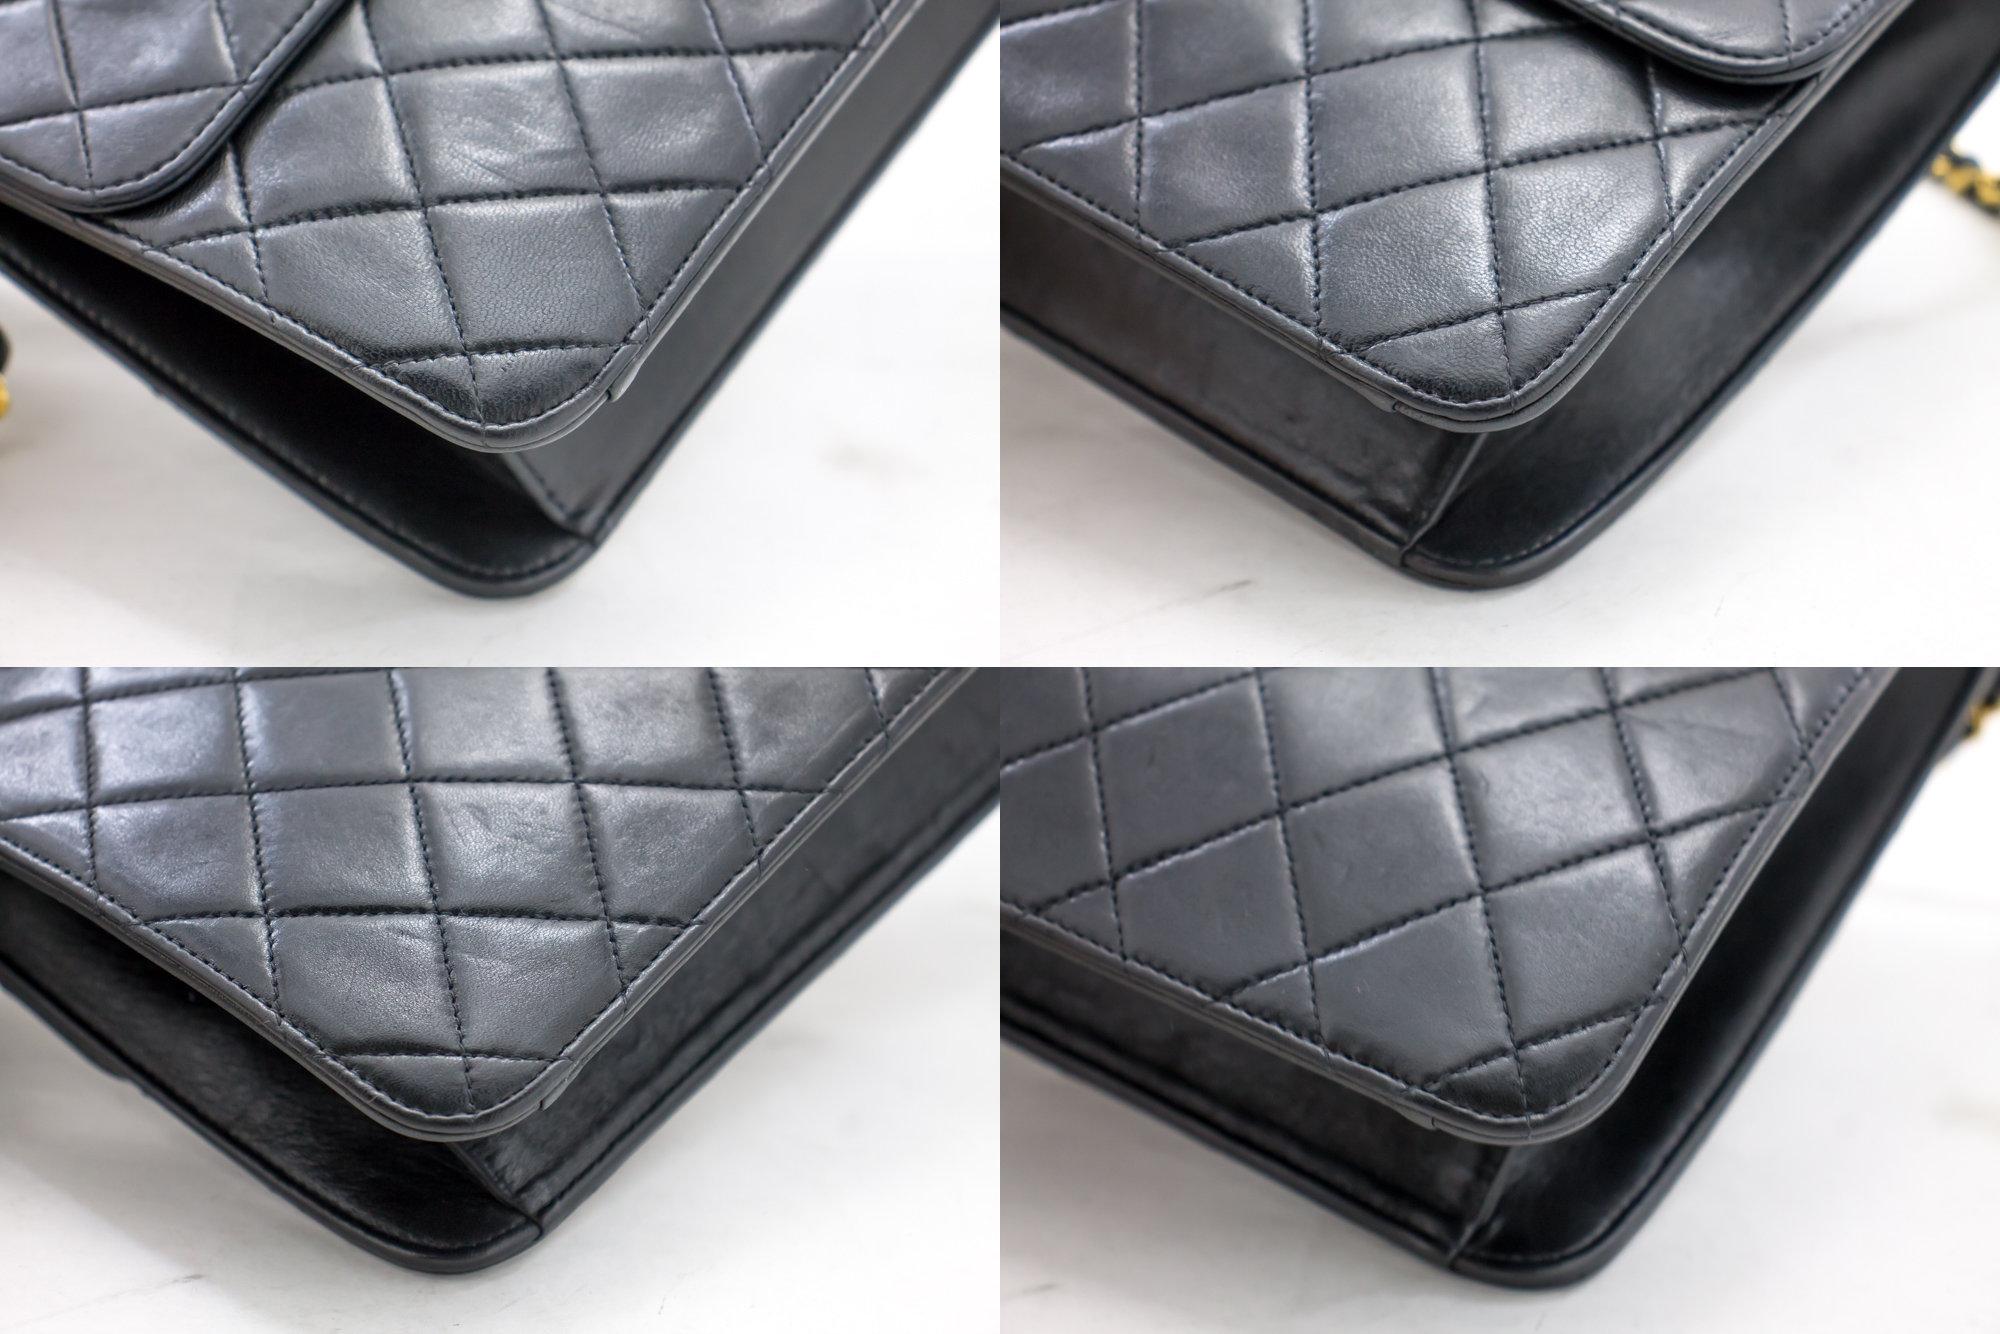 CHANEL Chain Shoulder Bag Black Clutch Flap Quilted Lambskin 2